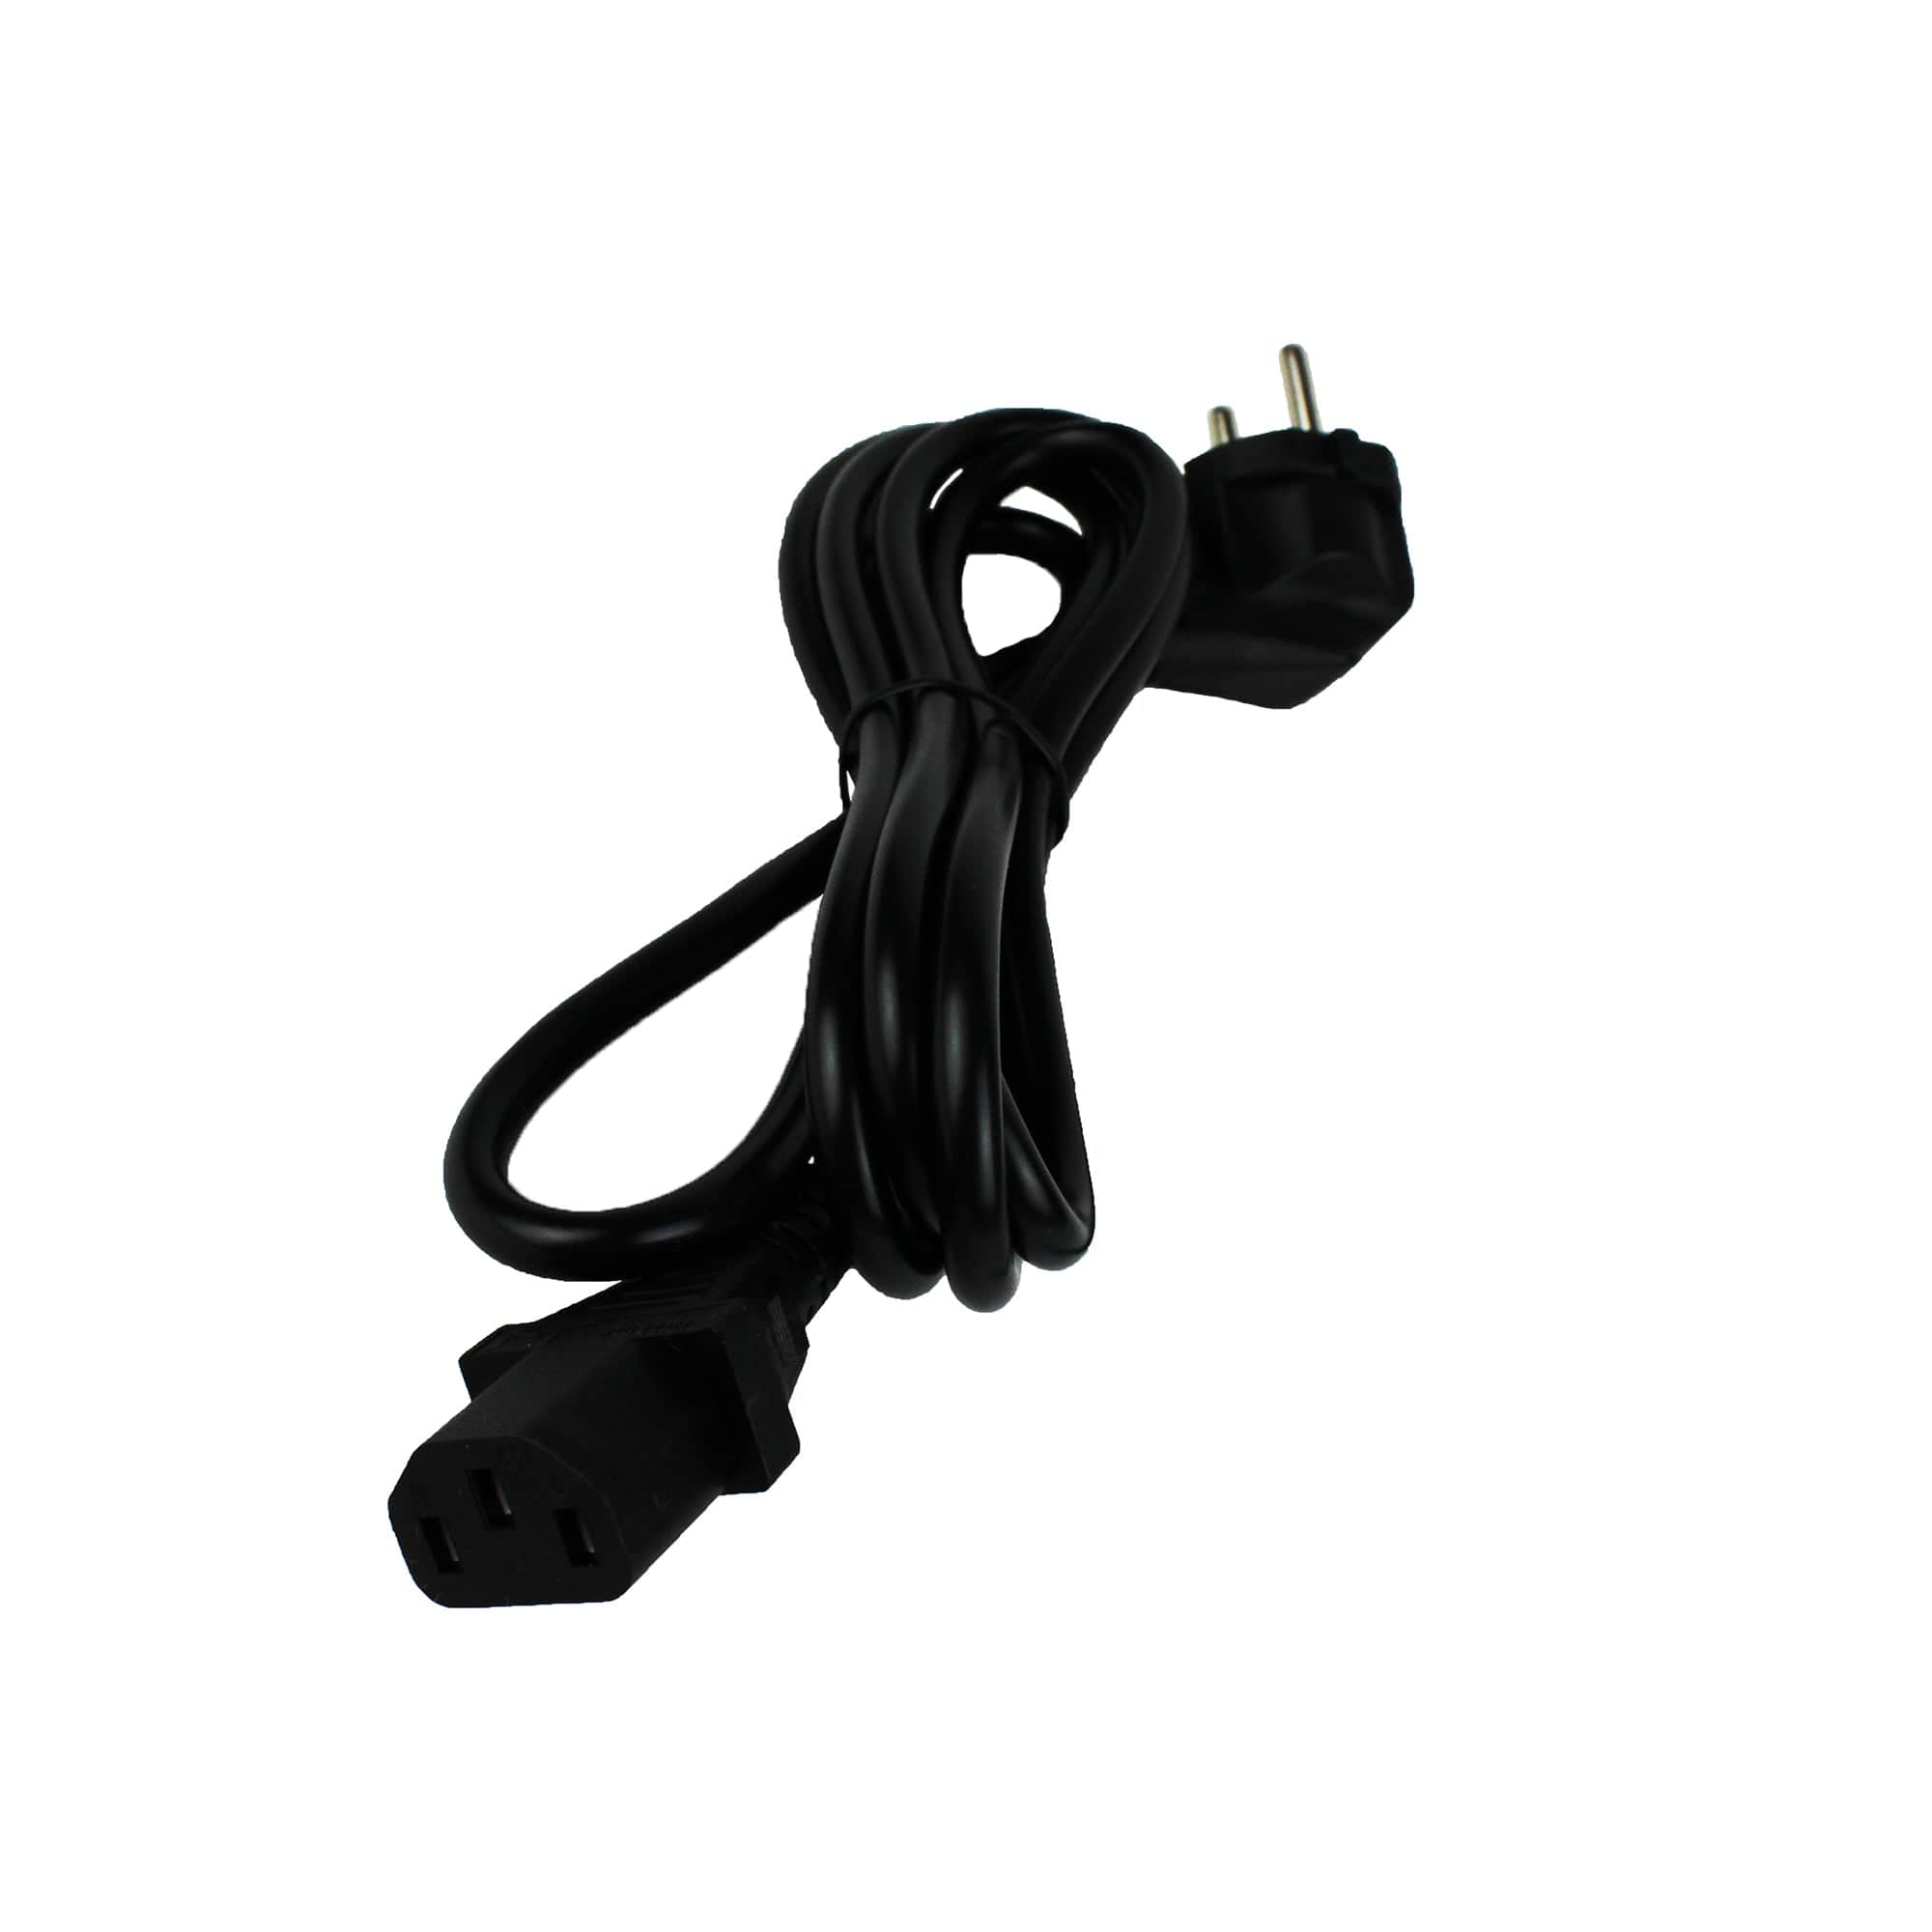 Dometic 4450002204 6' AC Power Cord for Select Dometic Refrigerator/Freezers